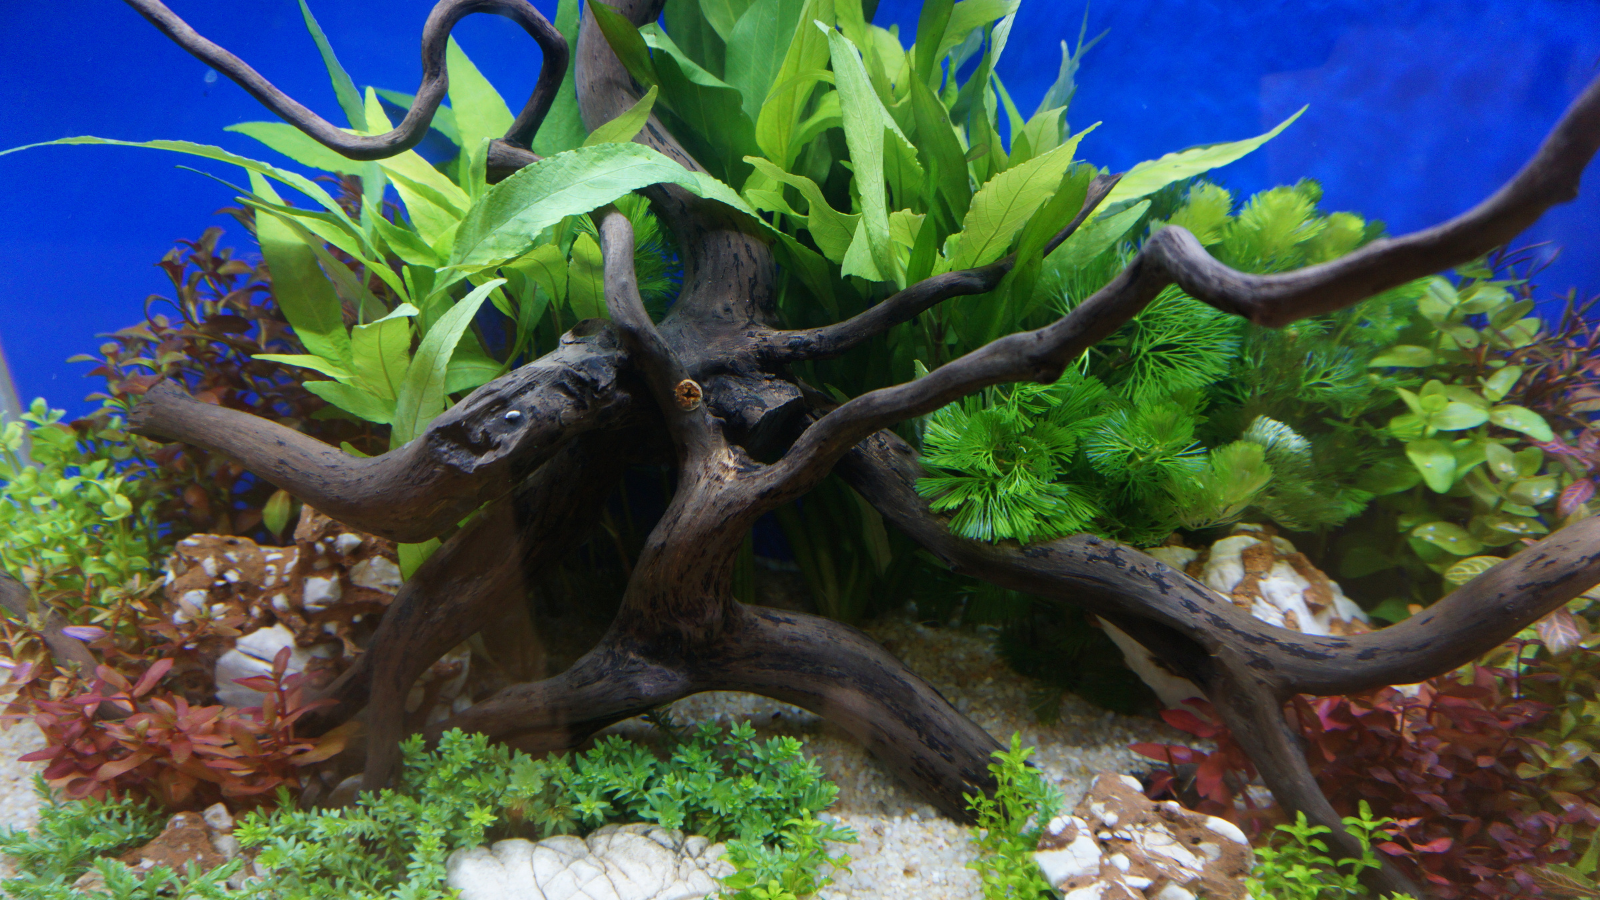 Wood is a great PH buffer for a softwater aquarium